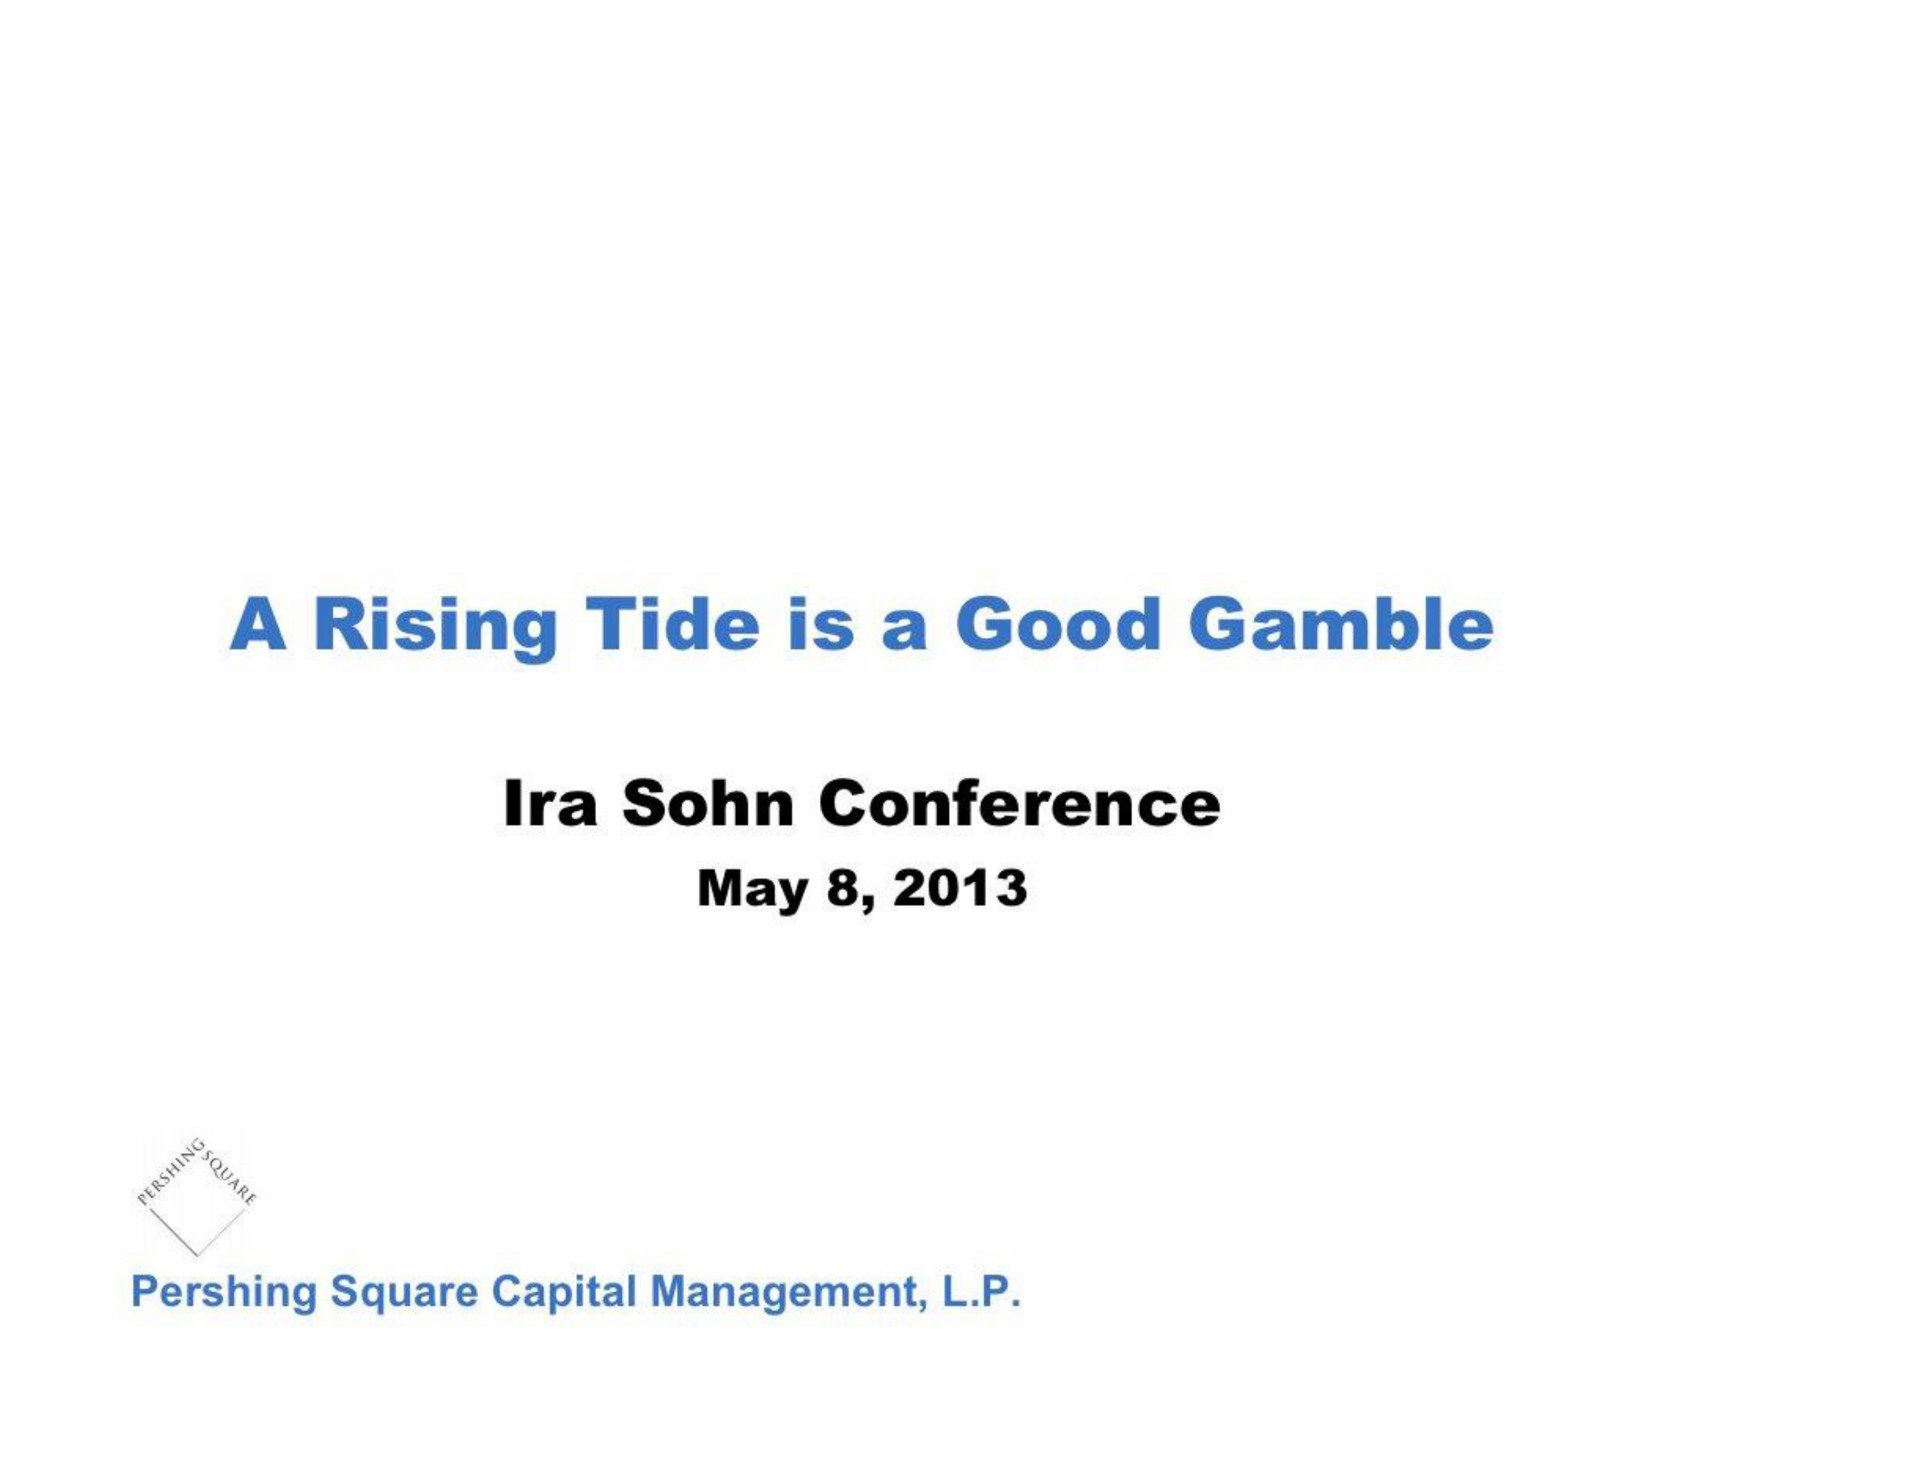 a rising tide is a good gamble conference may | Pershing Square